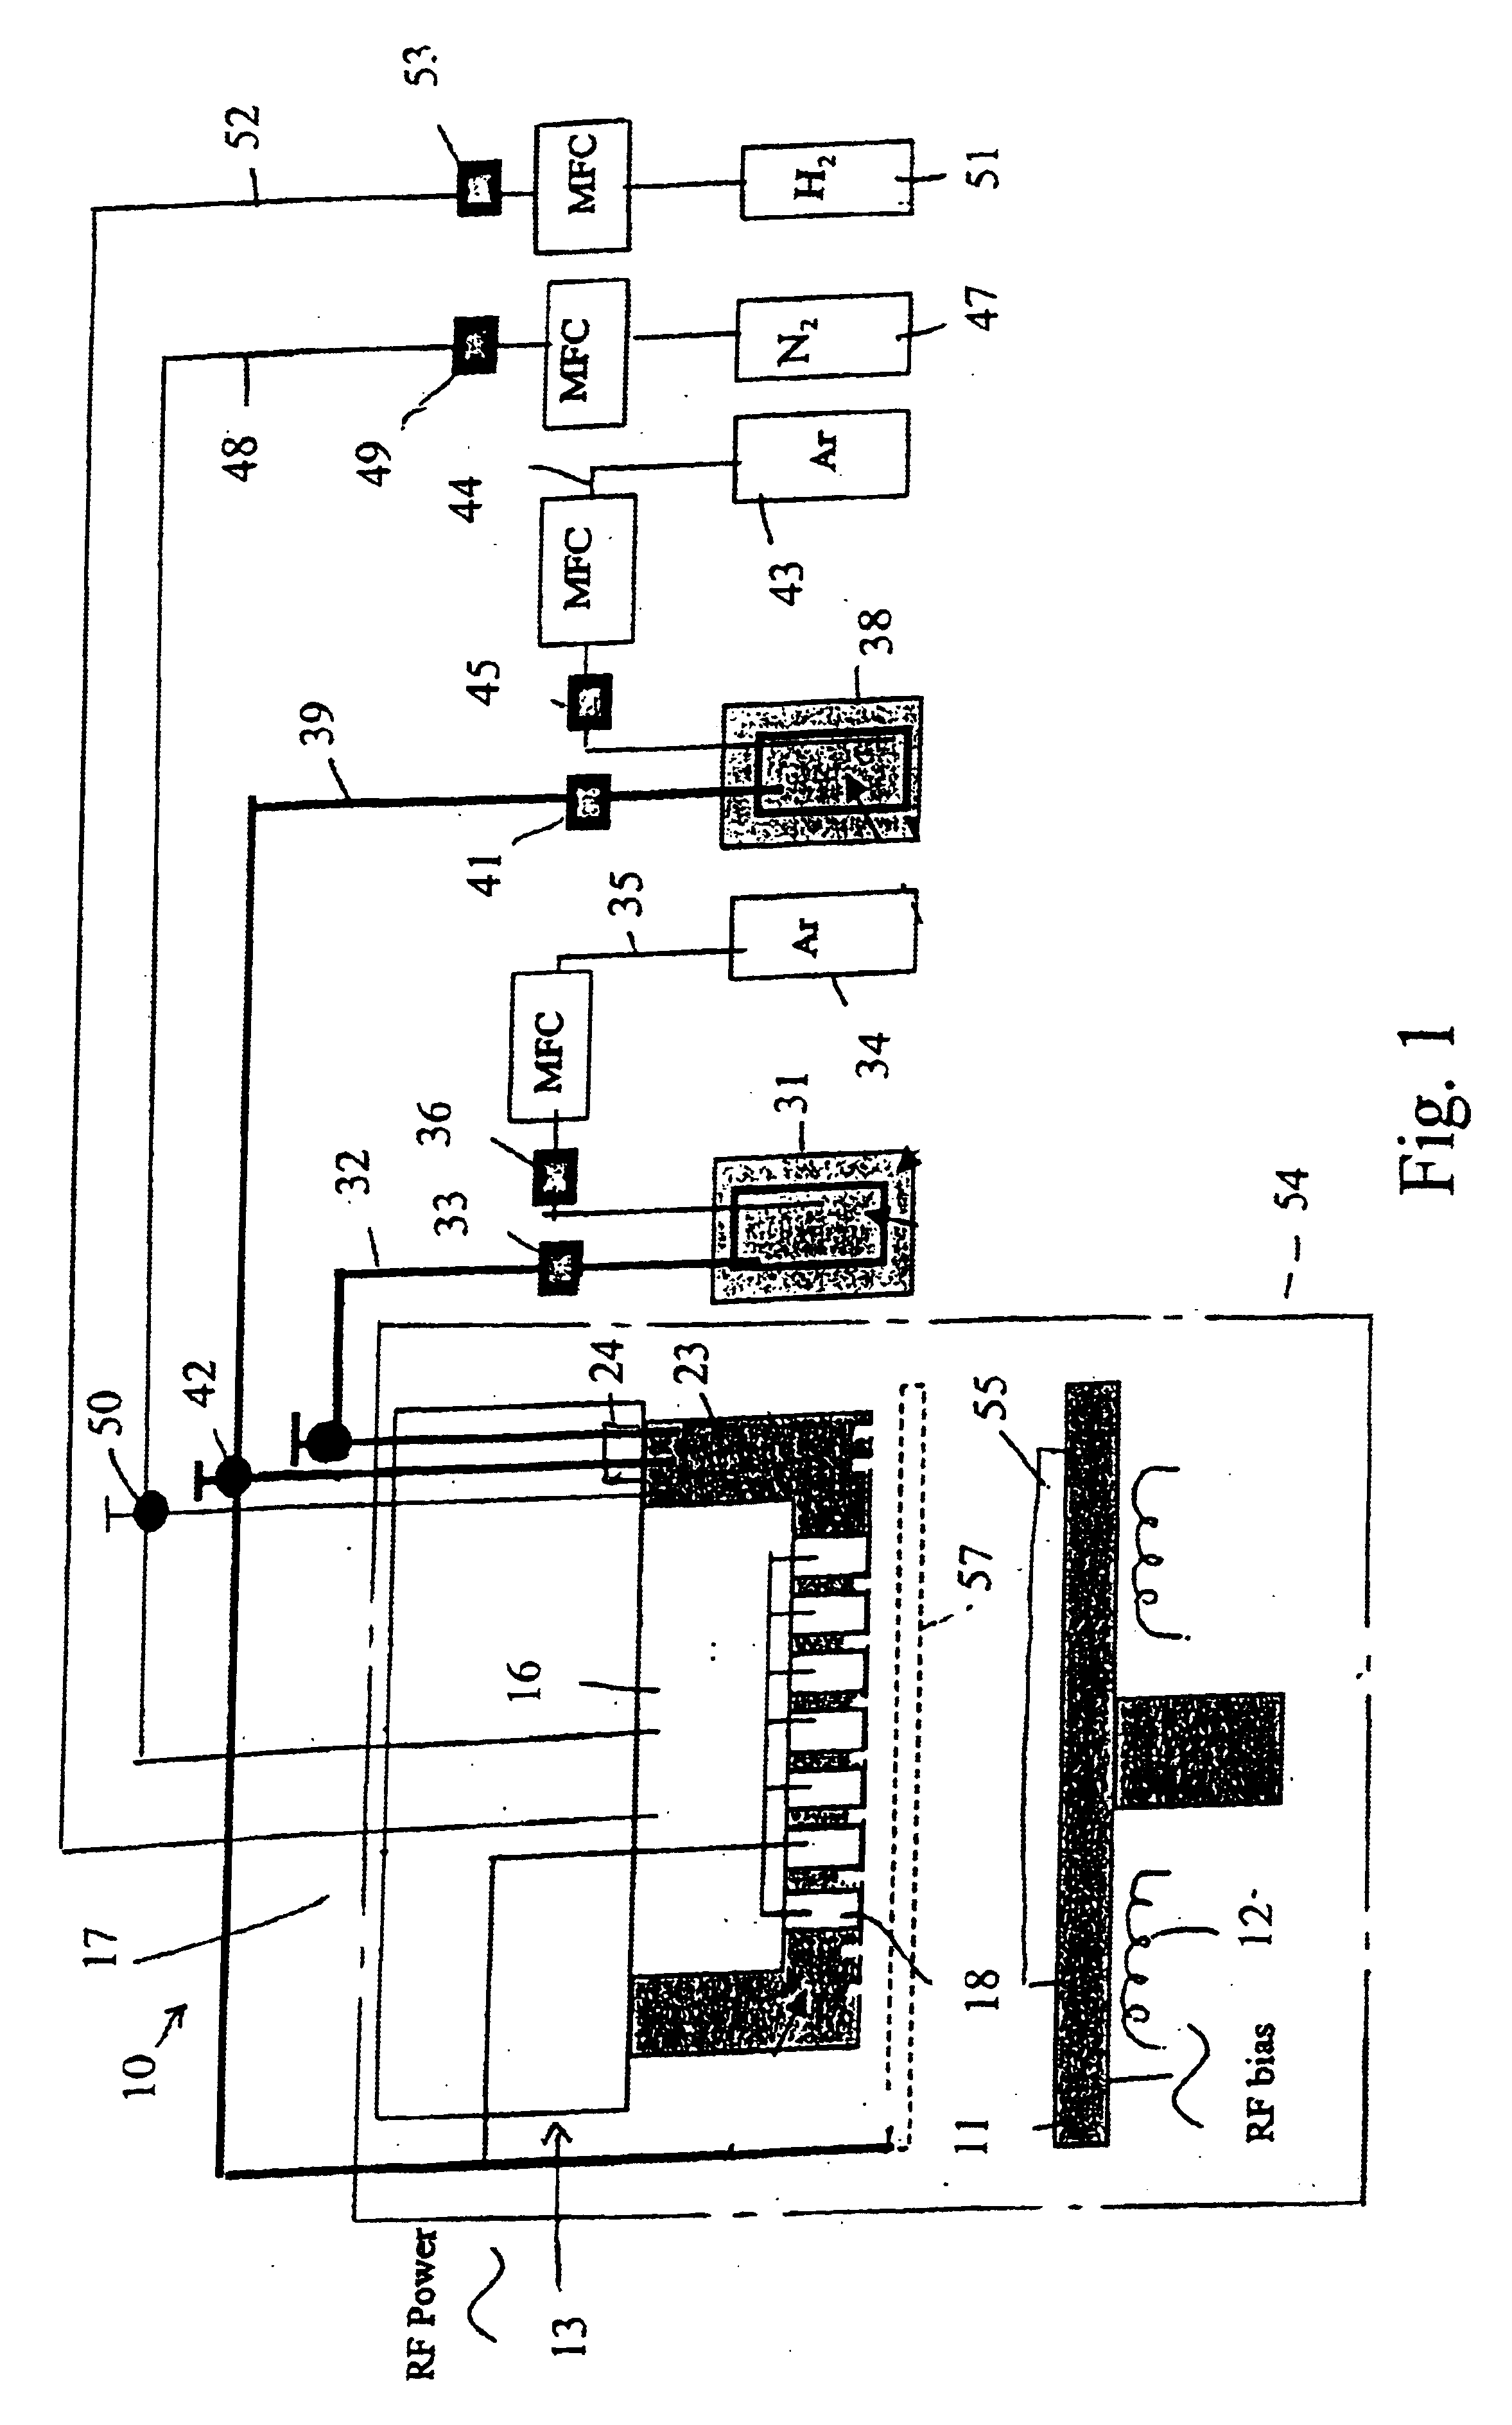 System and method of producing thin-film electrolyte